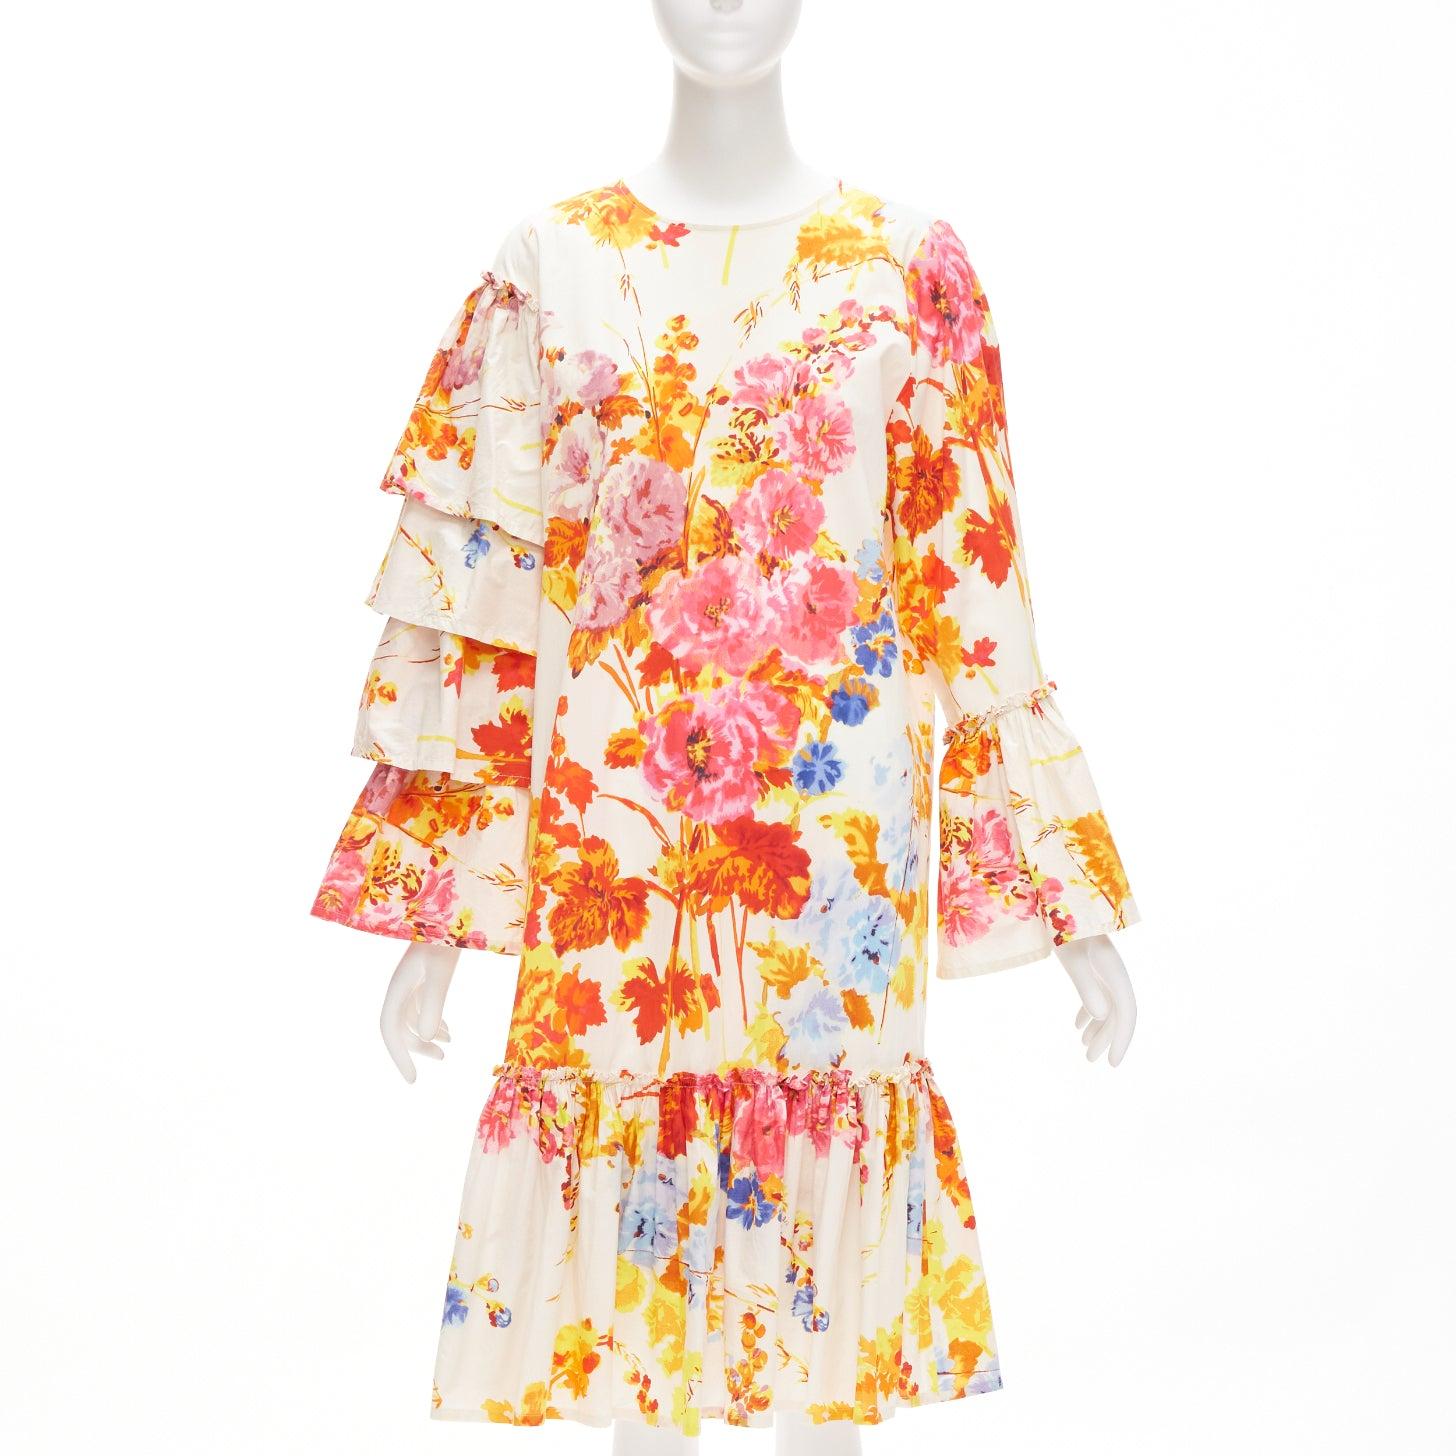 DRIES VAN NOTEN Runway cream colourful floral tiered sleeve ruffle midi dress FR34 XS
Reference: CELG/A00293
Brand: Dries Van Noten
Collection: Runway
Material: Cotton
Color: Cream, Multicolour
Pattern: Floral
Closure: Keyhole Button
Extra Details: